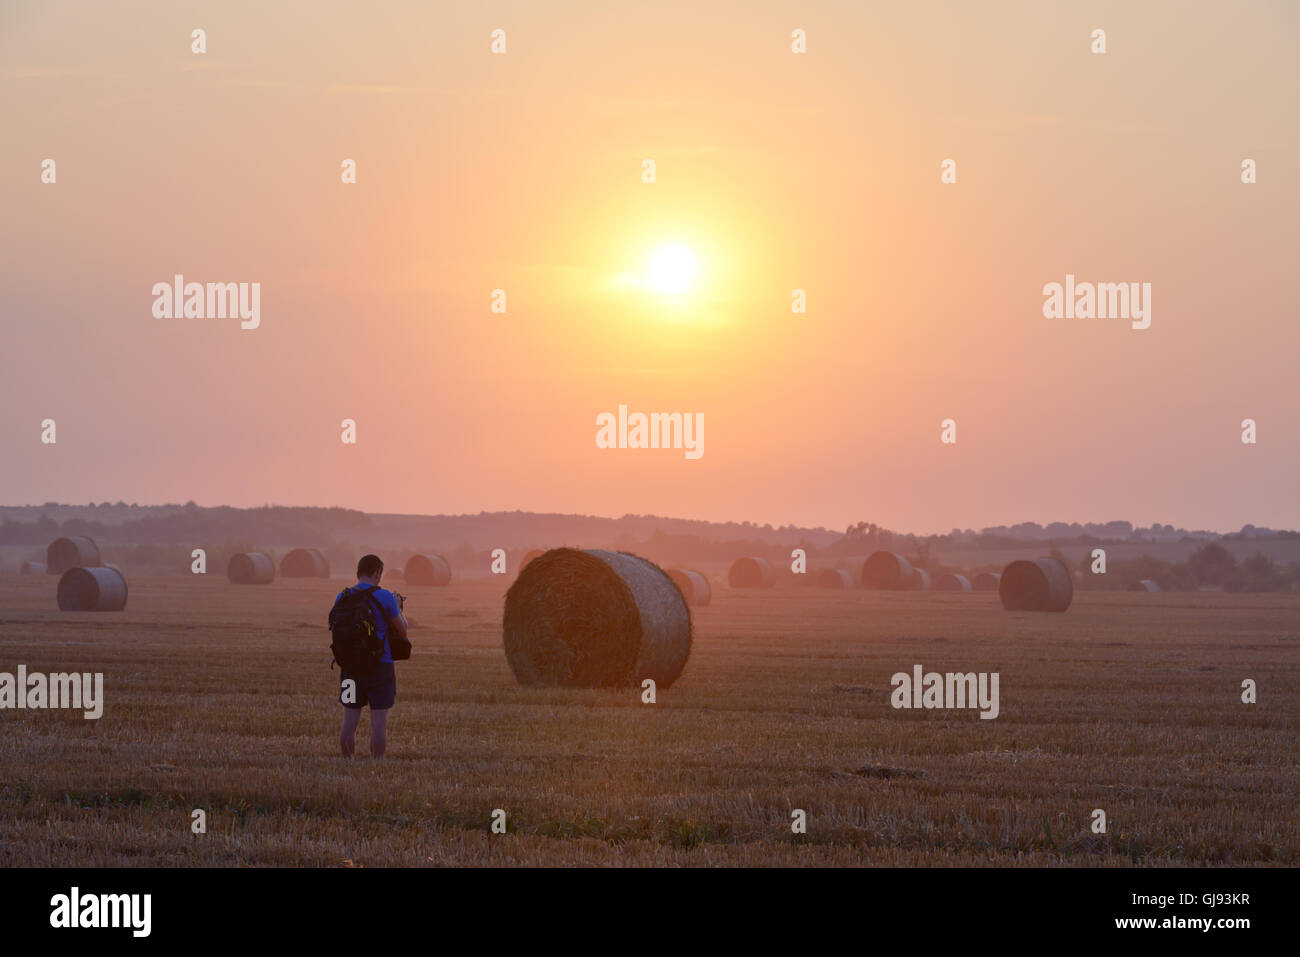 Amazing rural scene on autumn field with straw roles Stock Photo